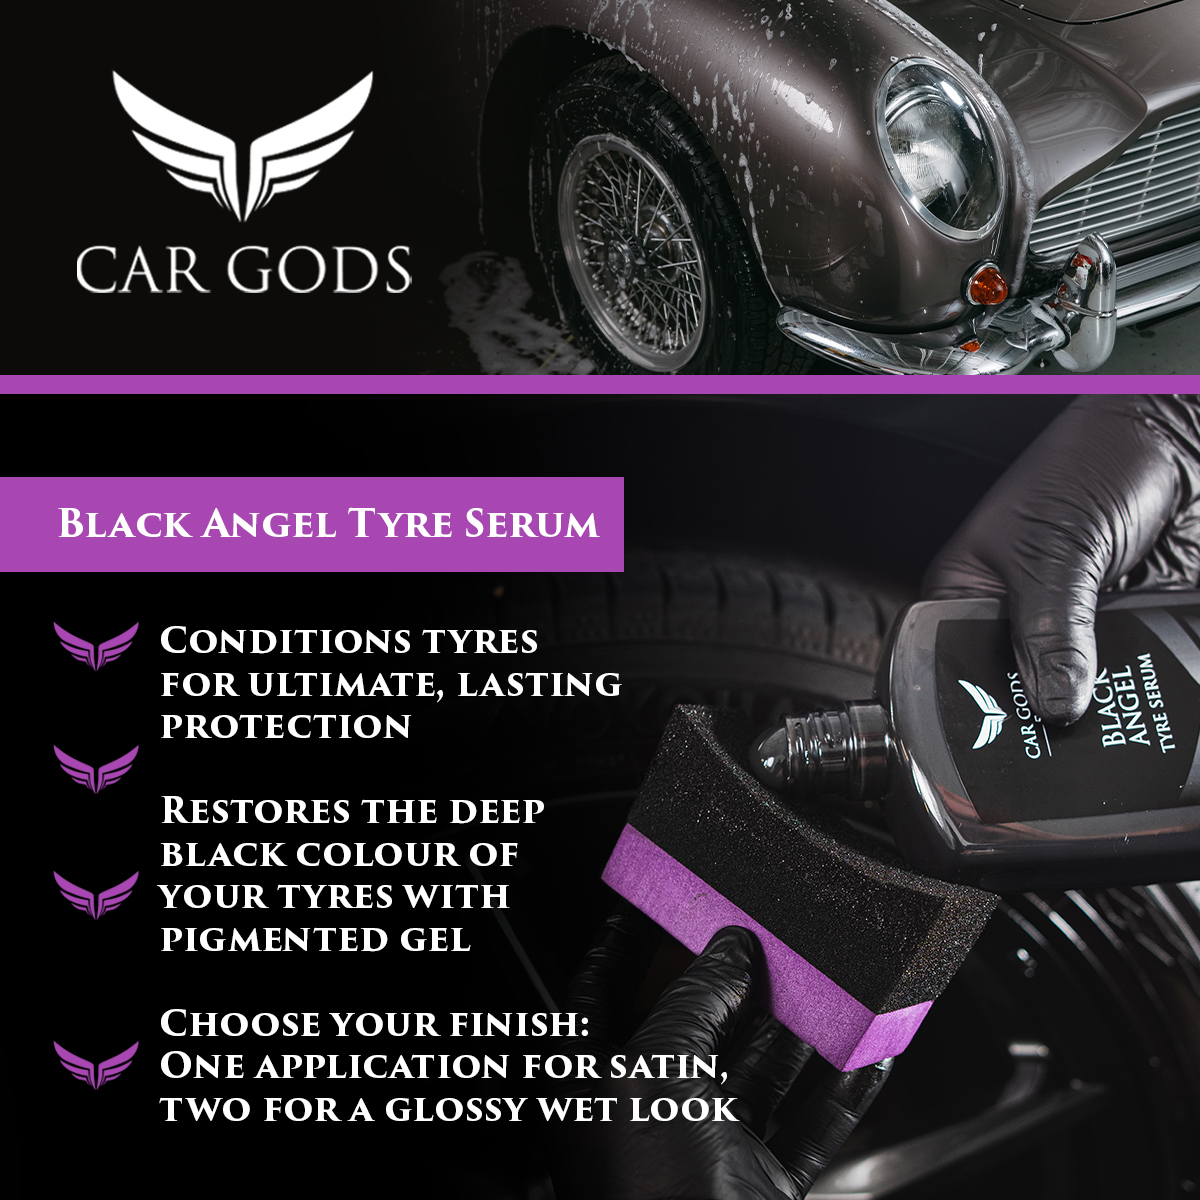 Car Gods Black Angel Tyre Serum. Conditions tyres for ultimate, lasting, hydrophobic protection and restores the deep black colour of your tyres with pigmented gel. Apply once for a satin finish, or twice for a glossy wet look.